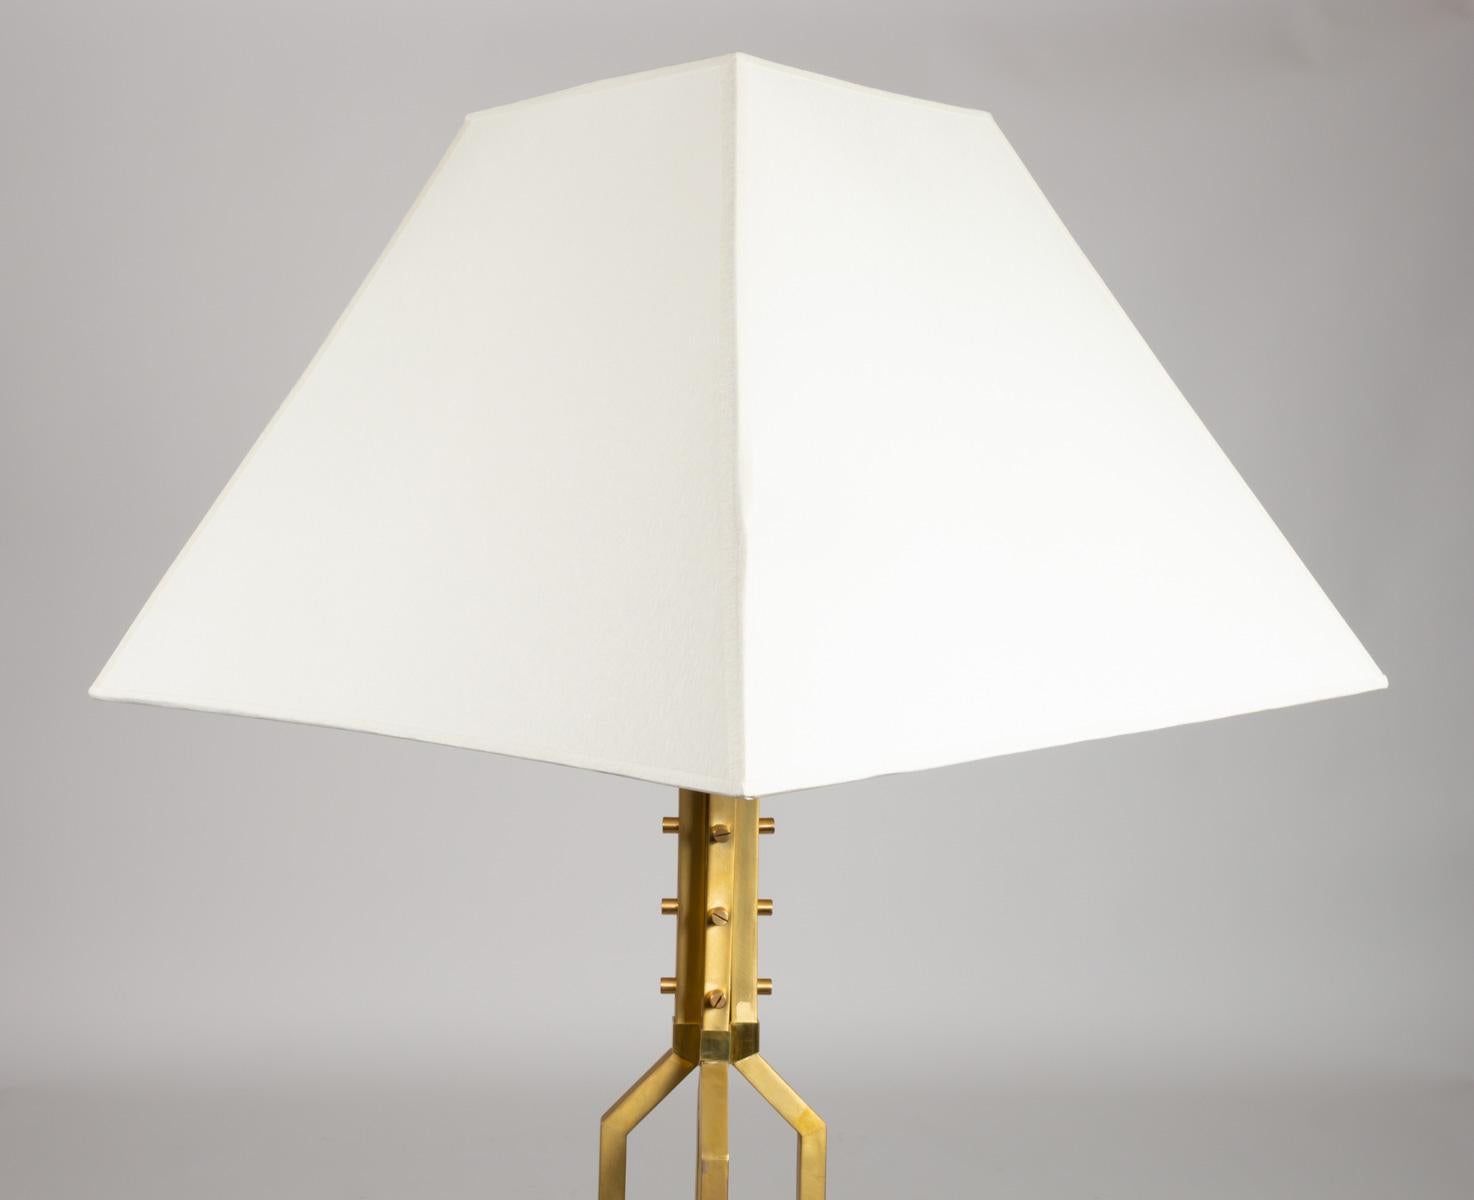 Elegant floor lamp all in golden brass.

The body is formed by four rods of square section joining and held together by pretty nuts at the base of the plinth.
This is composed of 4 flat brass rods forming a square assembled by the same nuts and